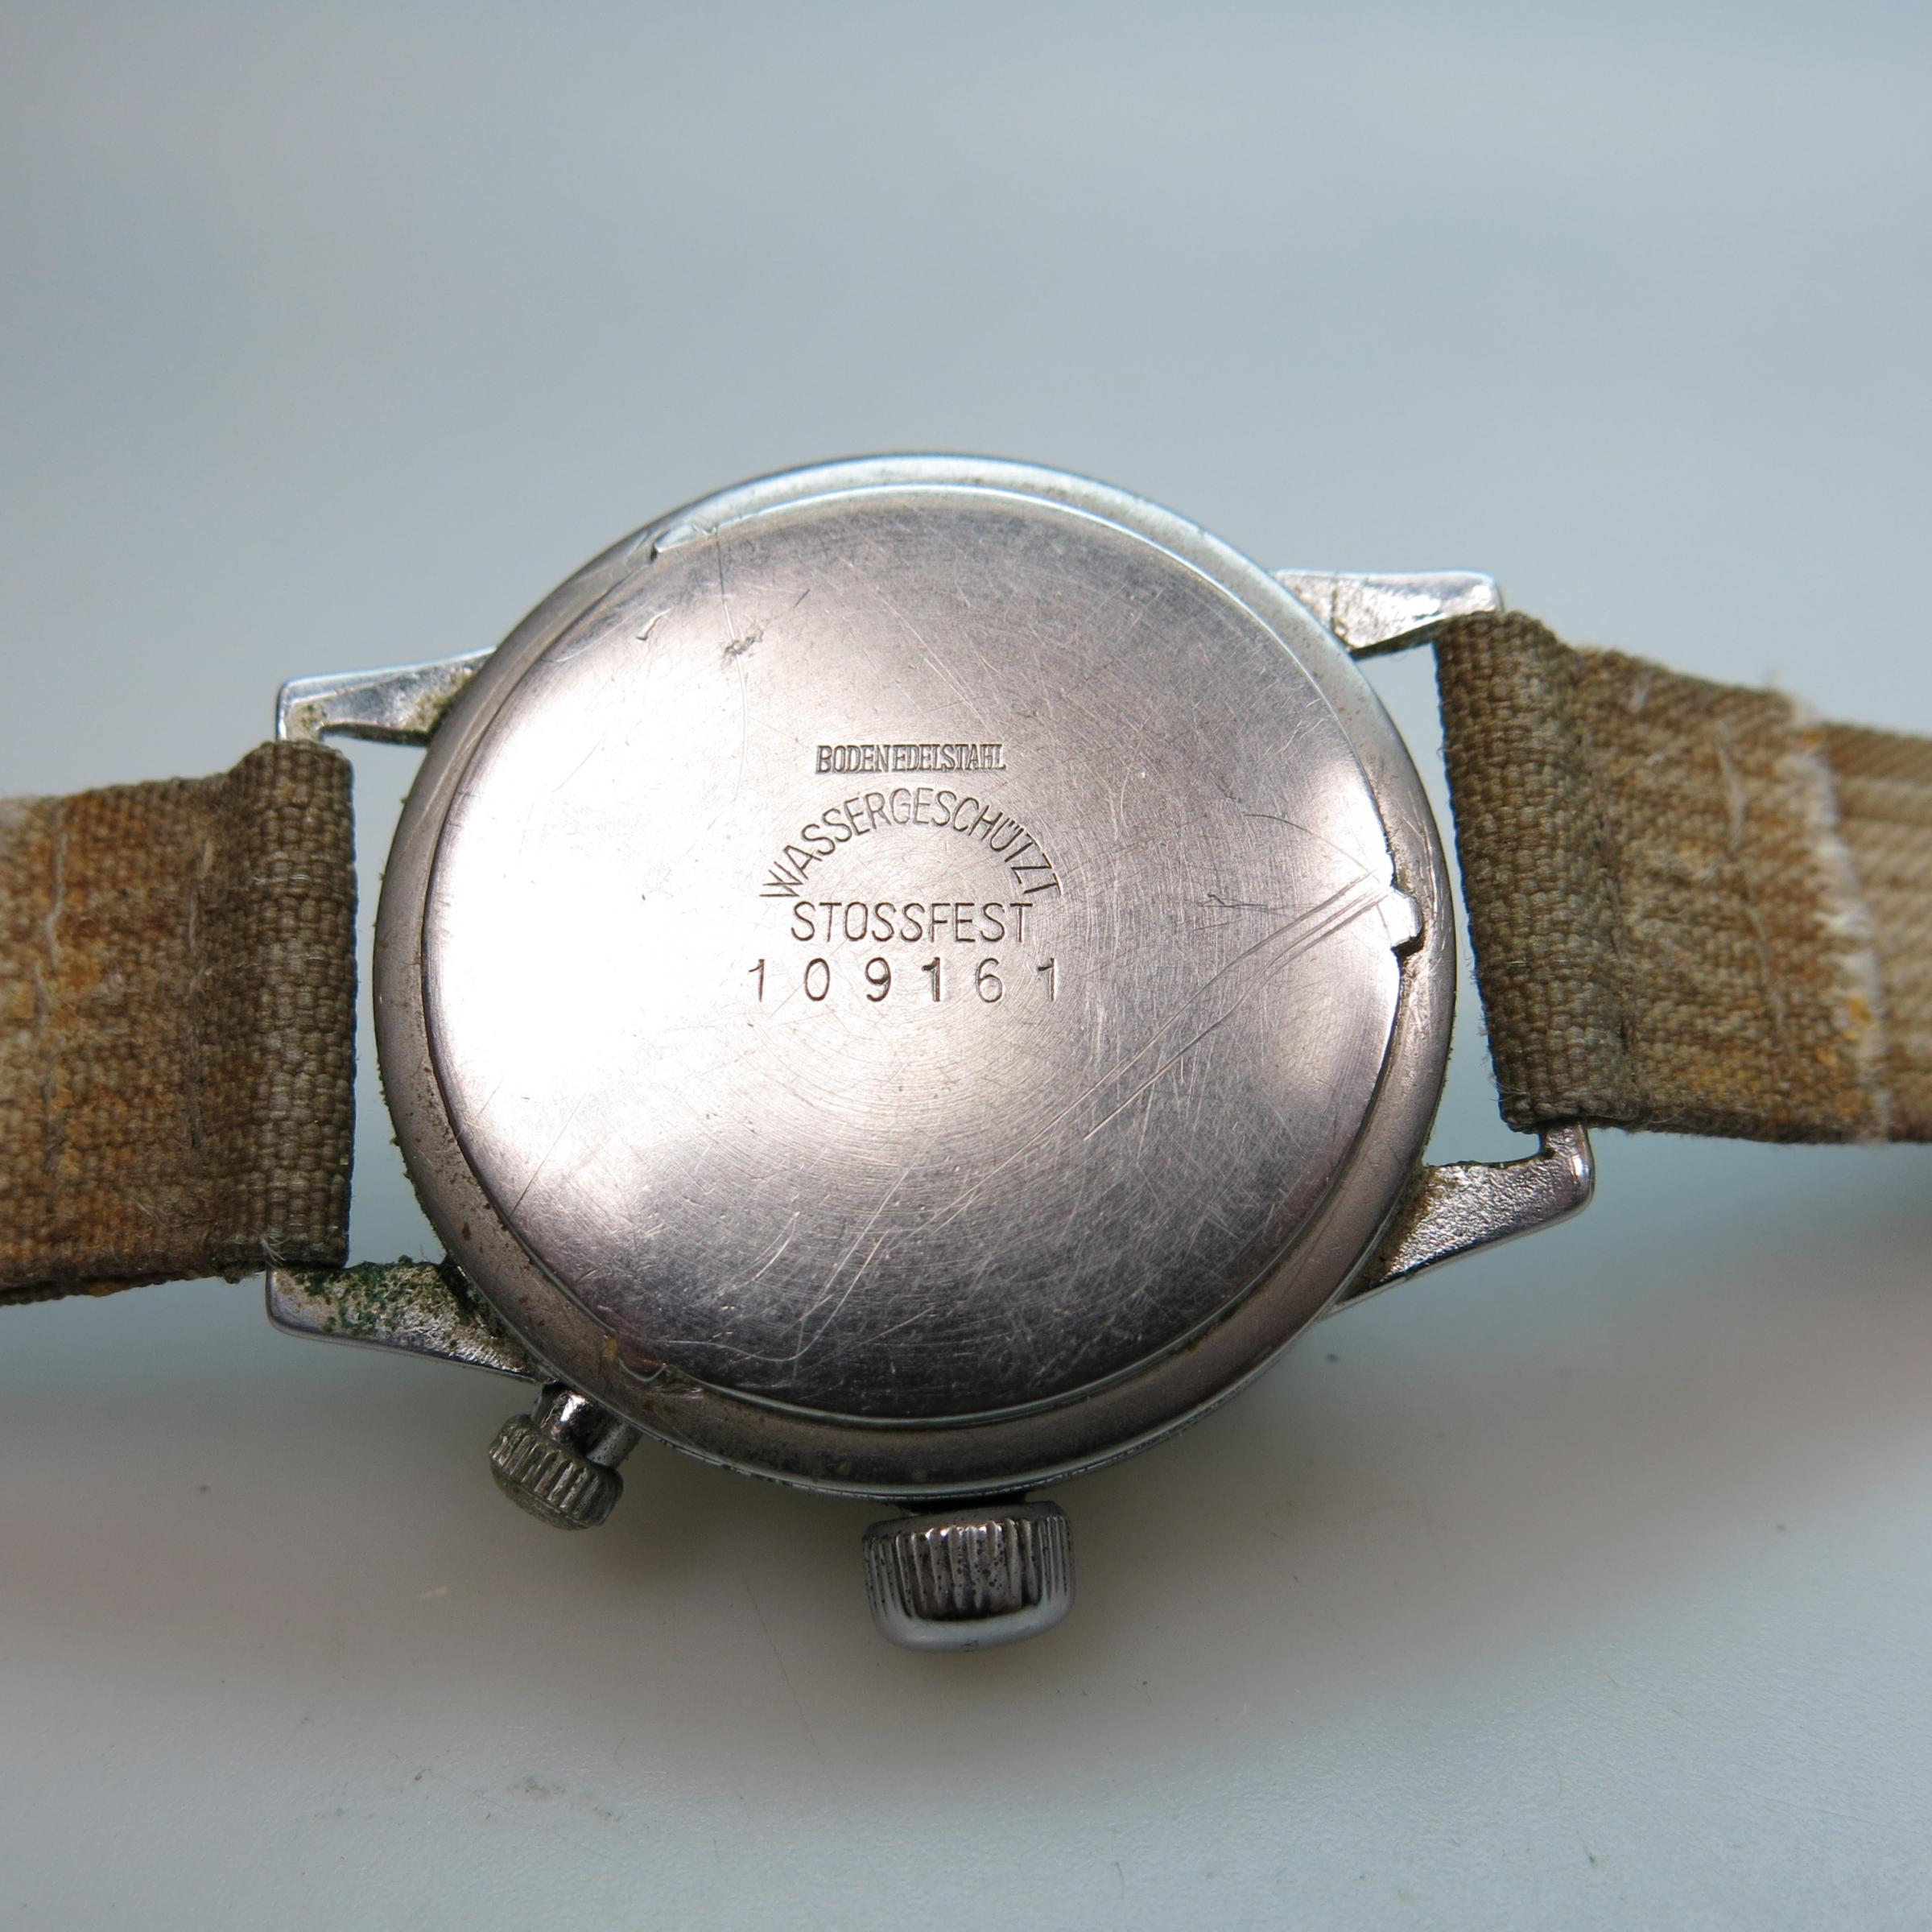 Hanhart Wristwatch With One Button Chronograph